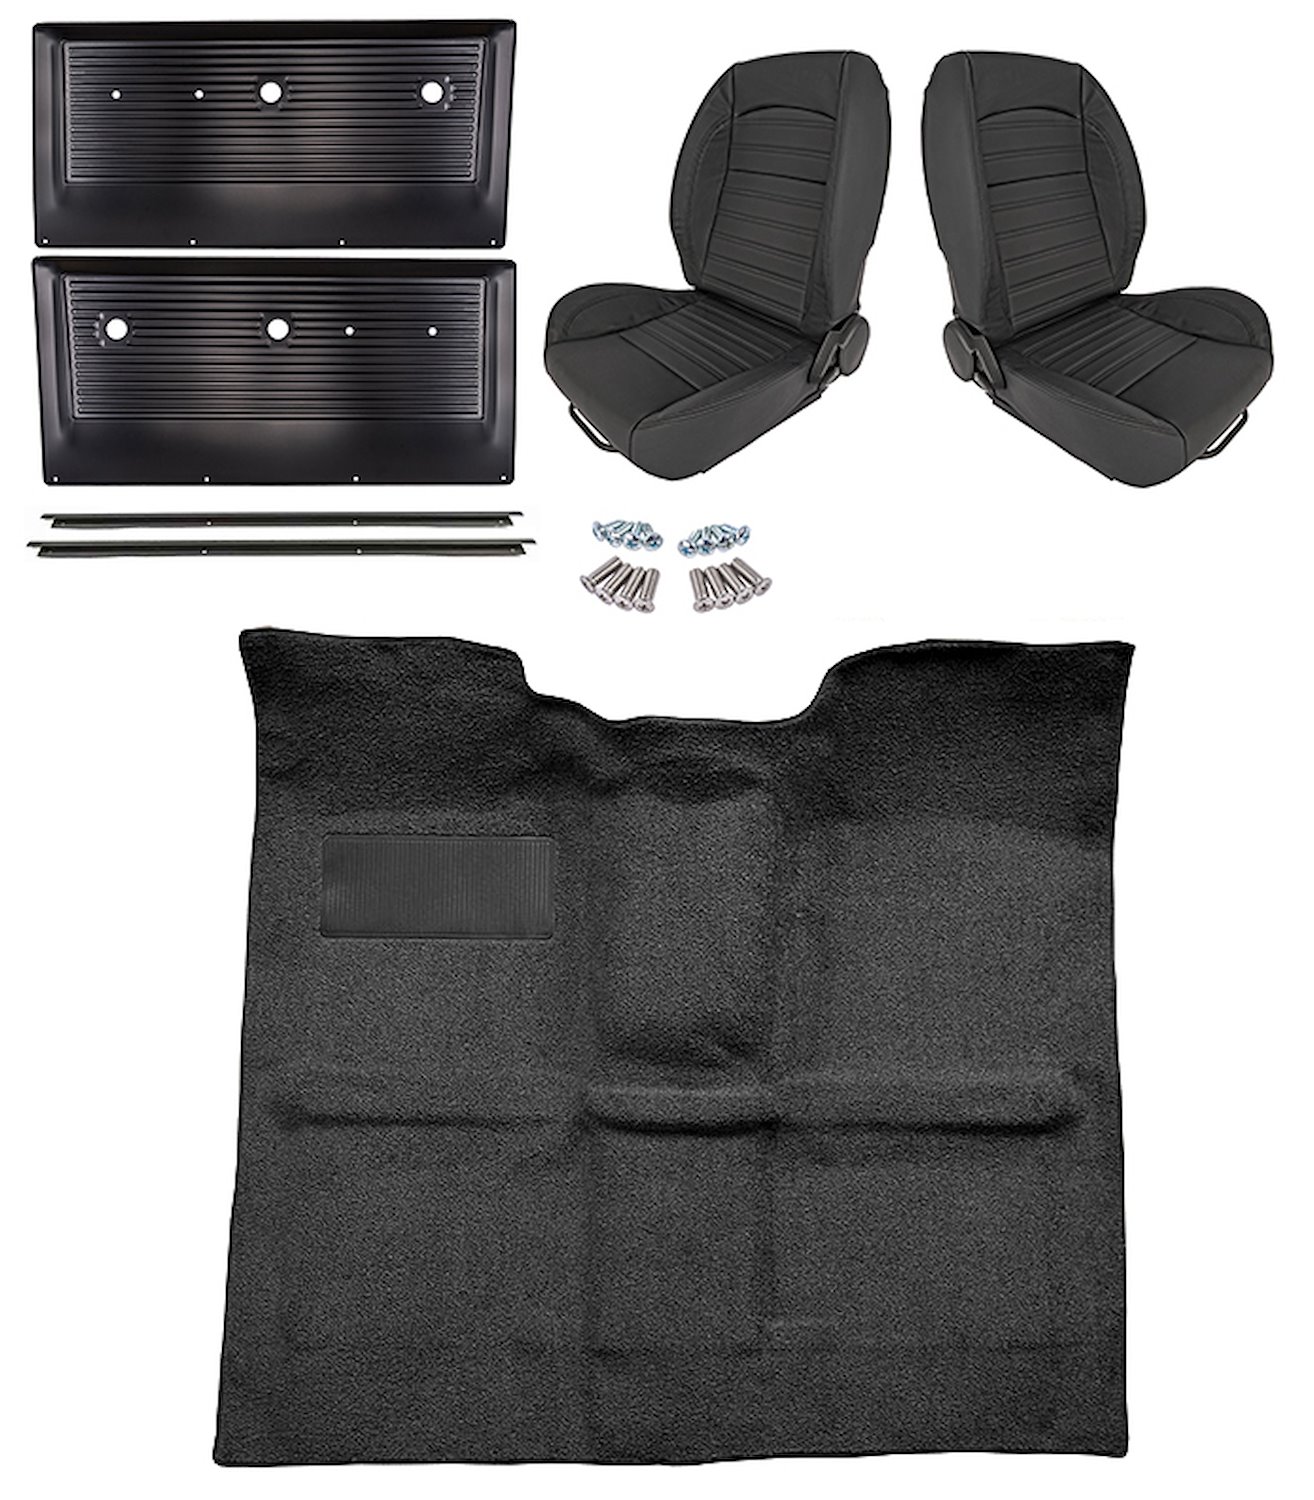 Black Interior Kit w/Low-Back Buckets for 1967-1972 GM C Series Regular Cab Truck w/o Gas Tank in Cab, 4-Speed